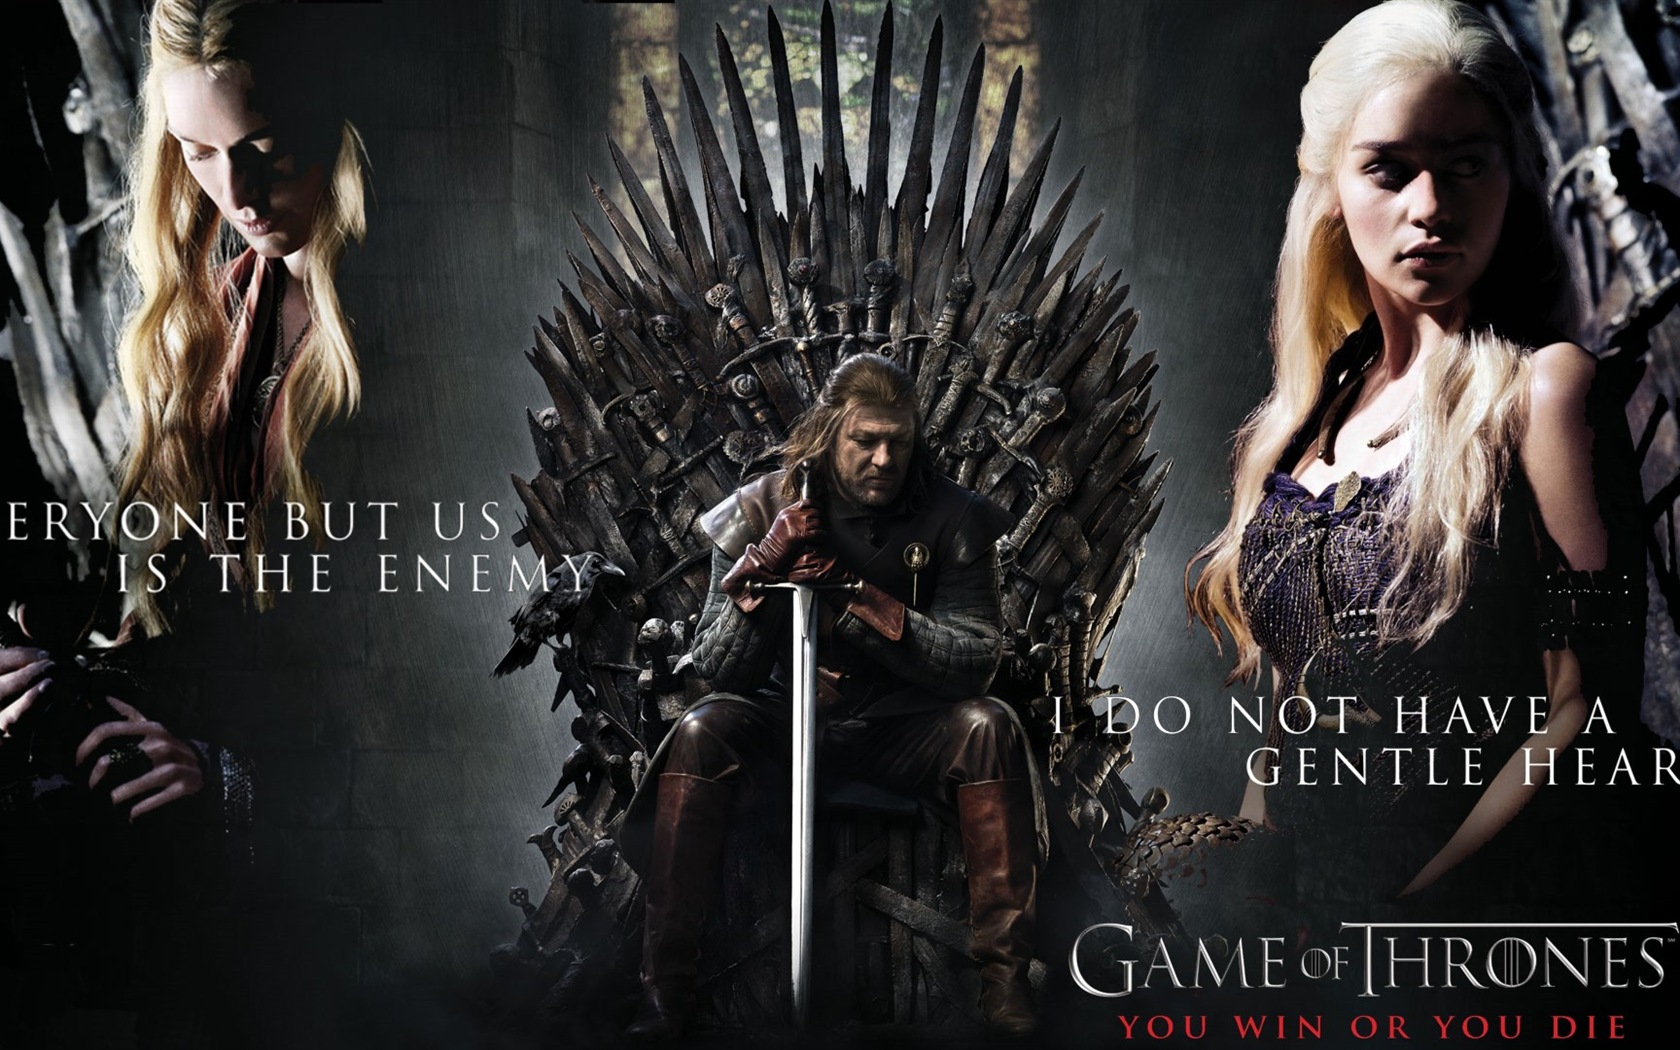 A Song of Ice and Fire: Game of Thrones HD wallpapers #9 - 1680x1050